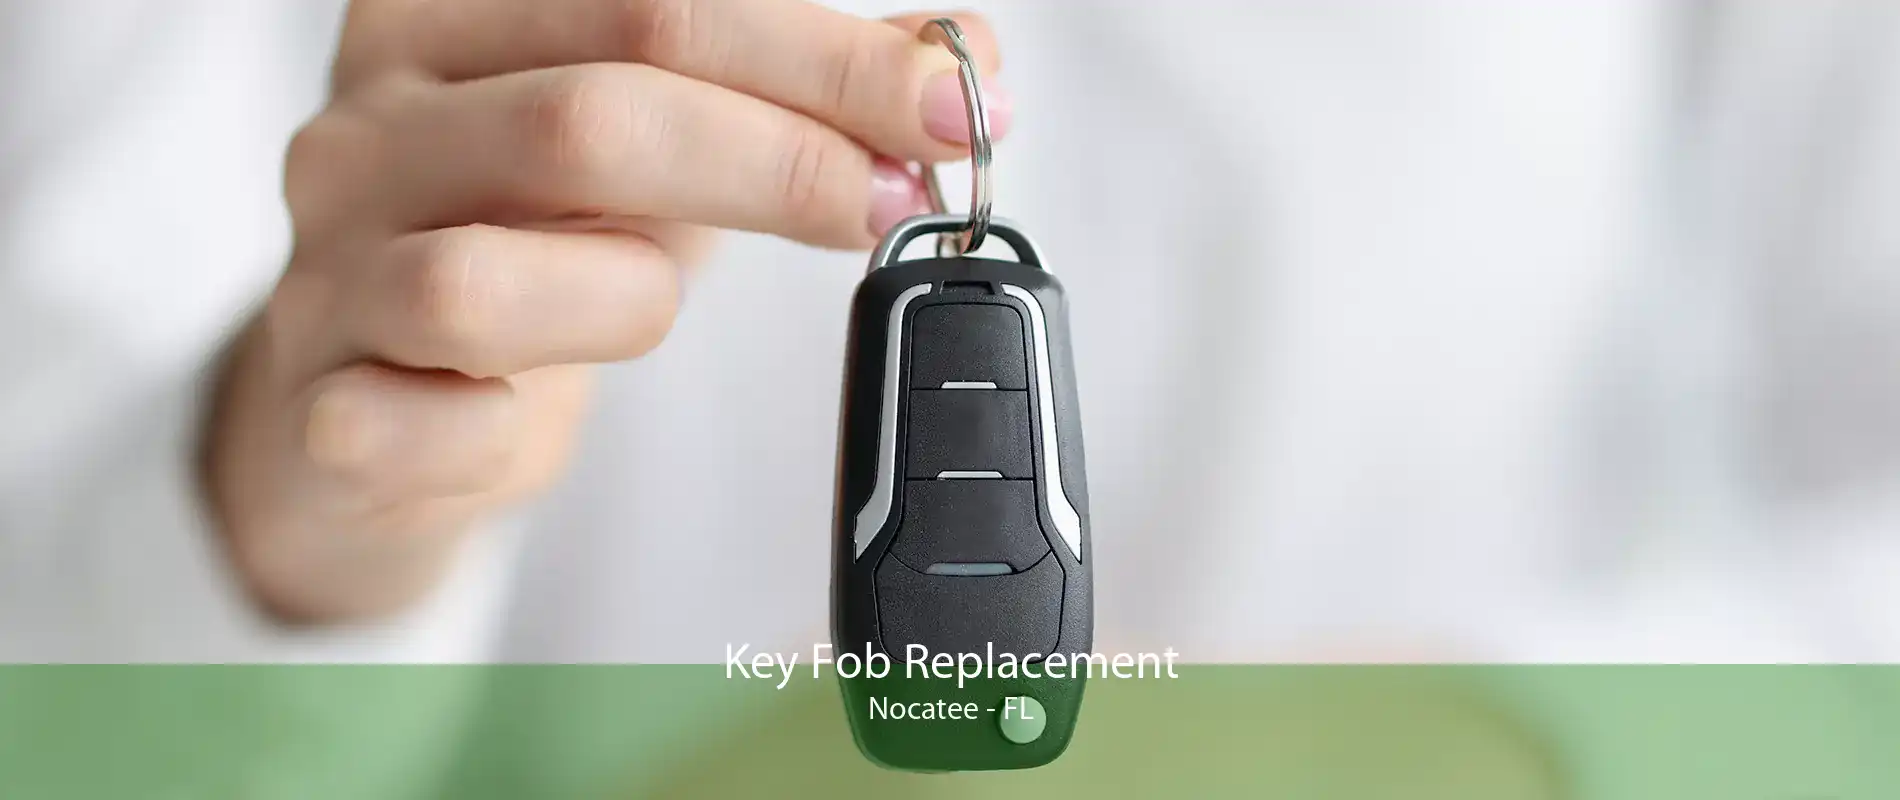 Key Fob Replacement Nocatee - FL